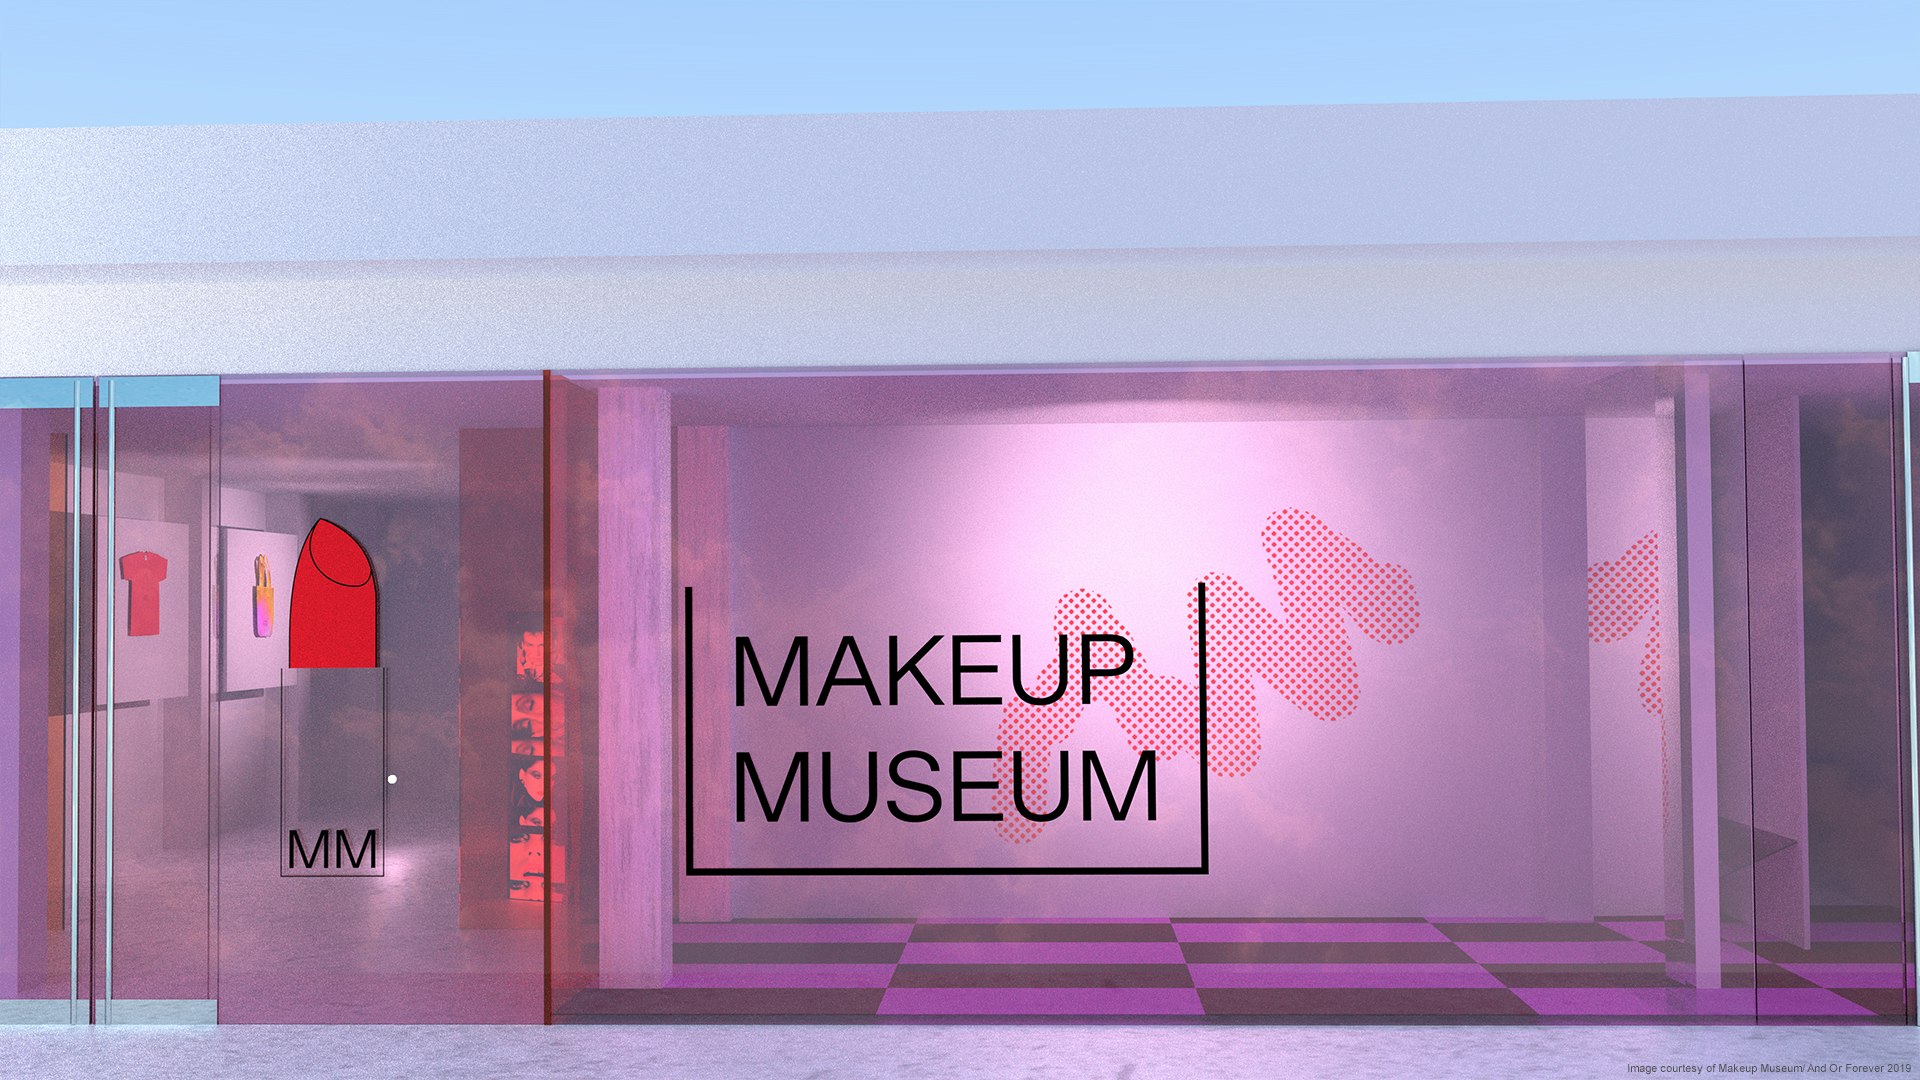 A rendering of the Makeup Museum façade, with its logo front and center